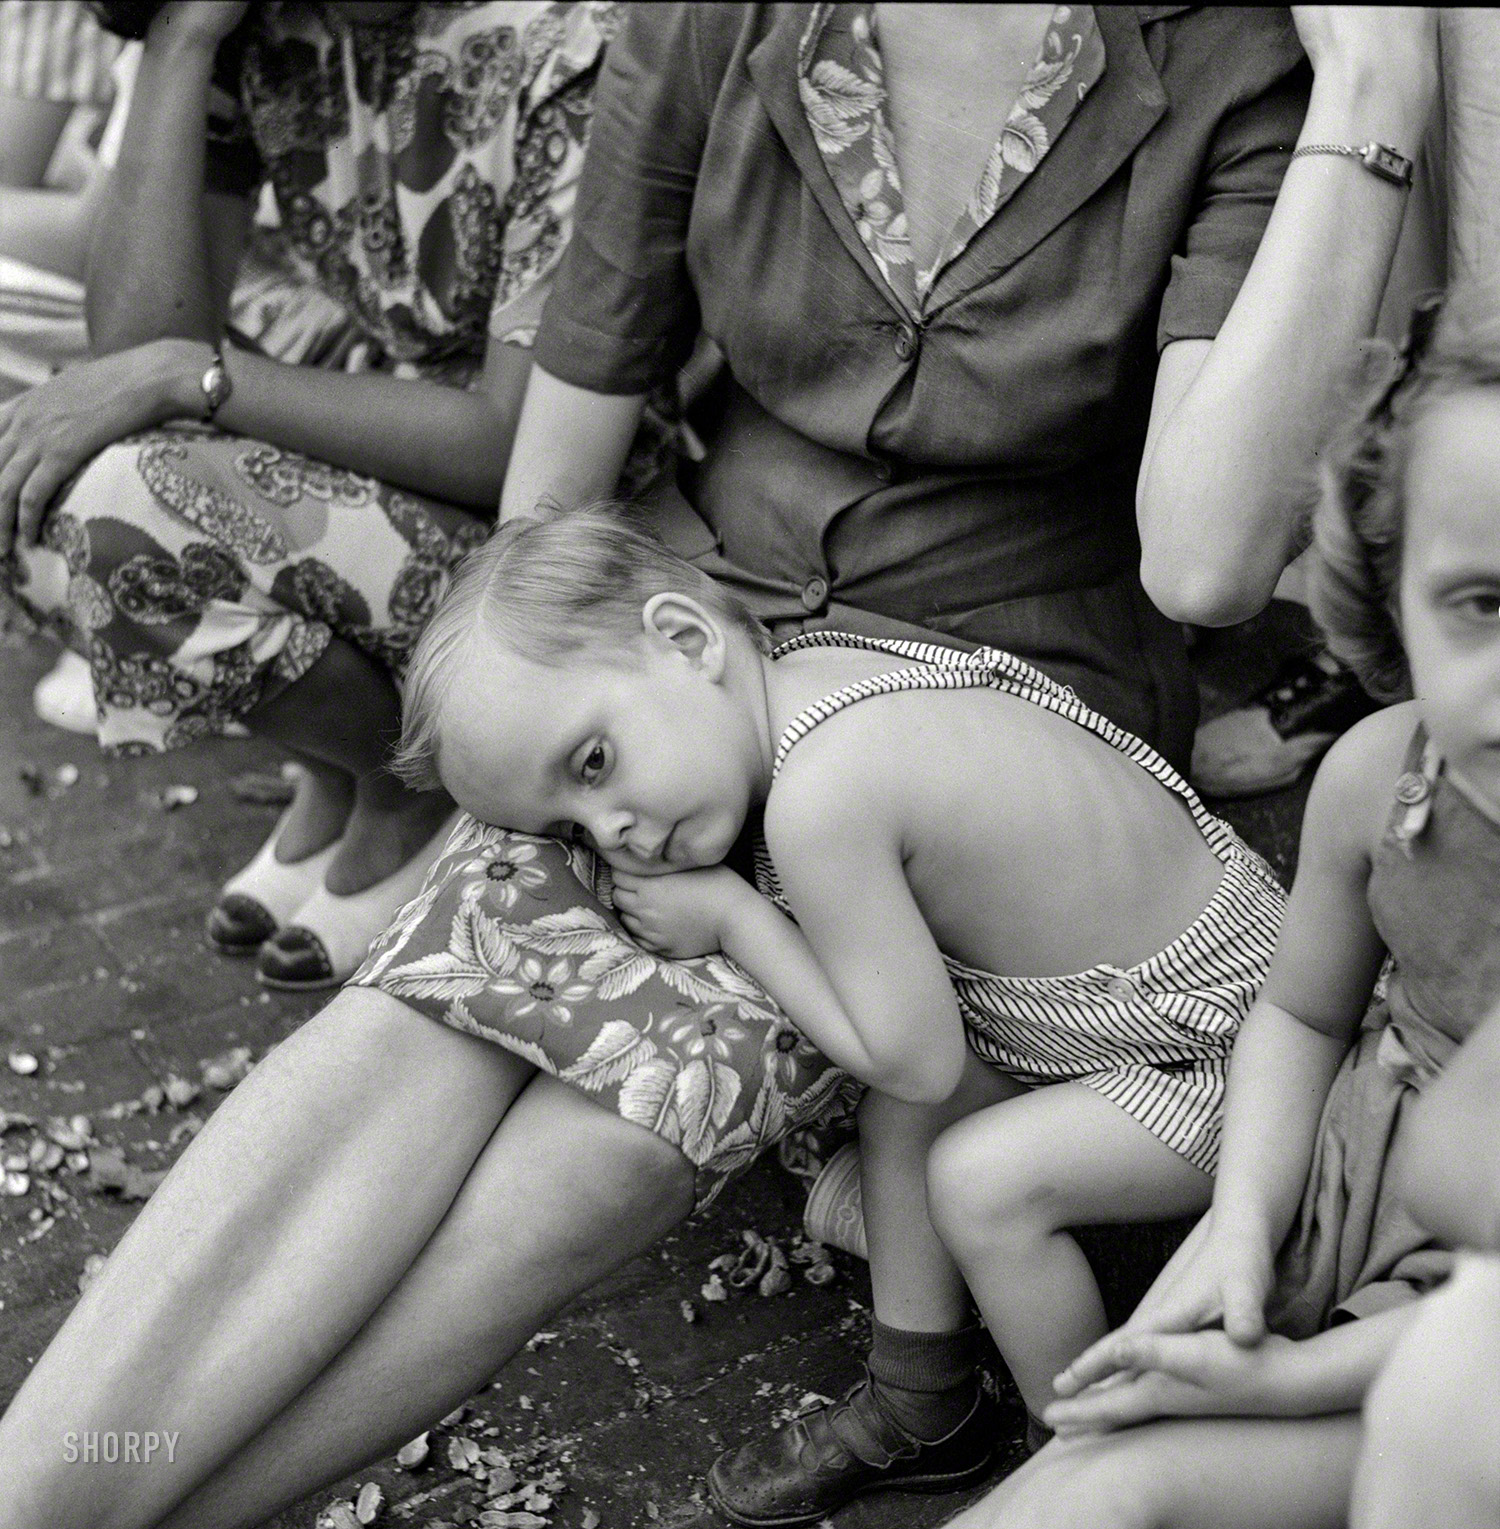 July 1943. Washington, D.C. "Spectators at the parade to recruit civilian defense volunteers." Photo by Esther Bubley, Office of War Information. View full size.